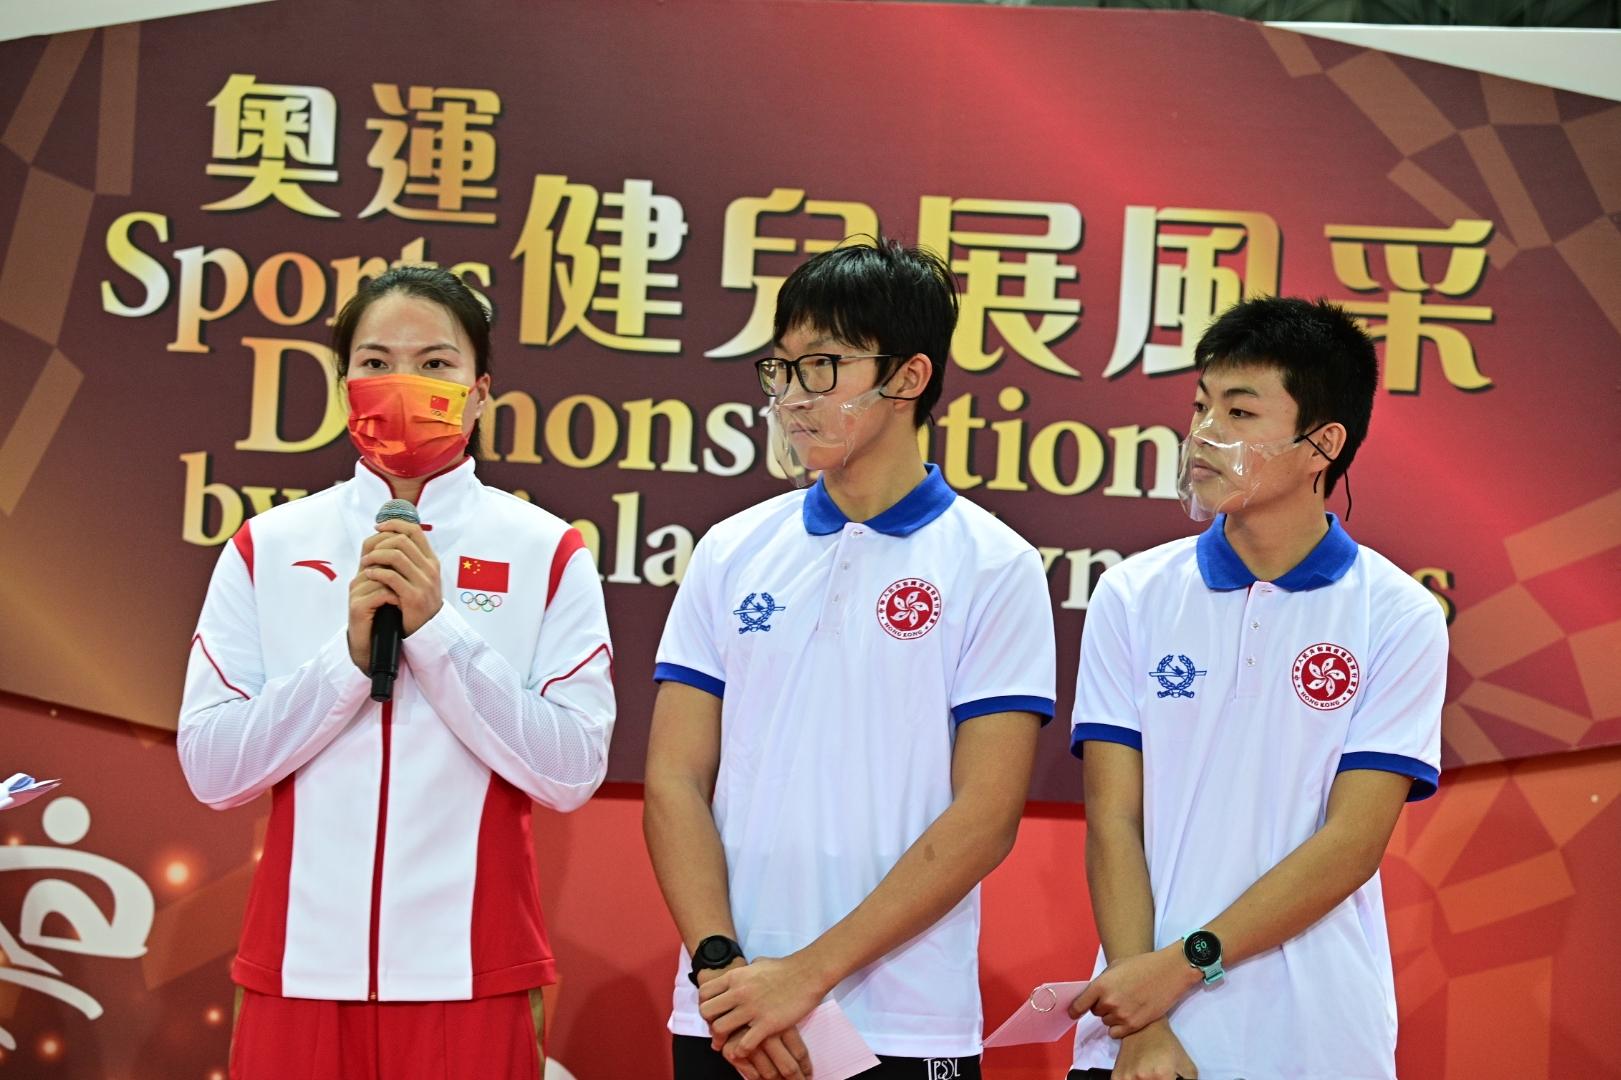 The delegation of Tokyo 2020 Olympic Games Mainland Olympians attended the sports demonstrations at Victoria Park Swimming Pool this morning (December 4). Photo shows Mainland canoe athlete Xu Shixiao (left) having a chat and skill exchange with local young athletes.